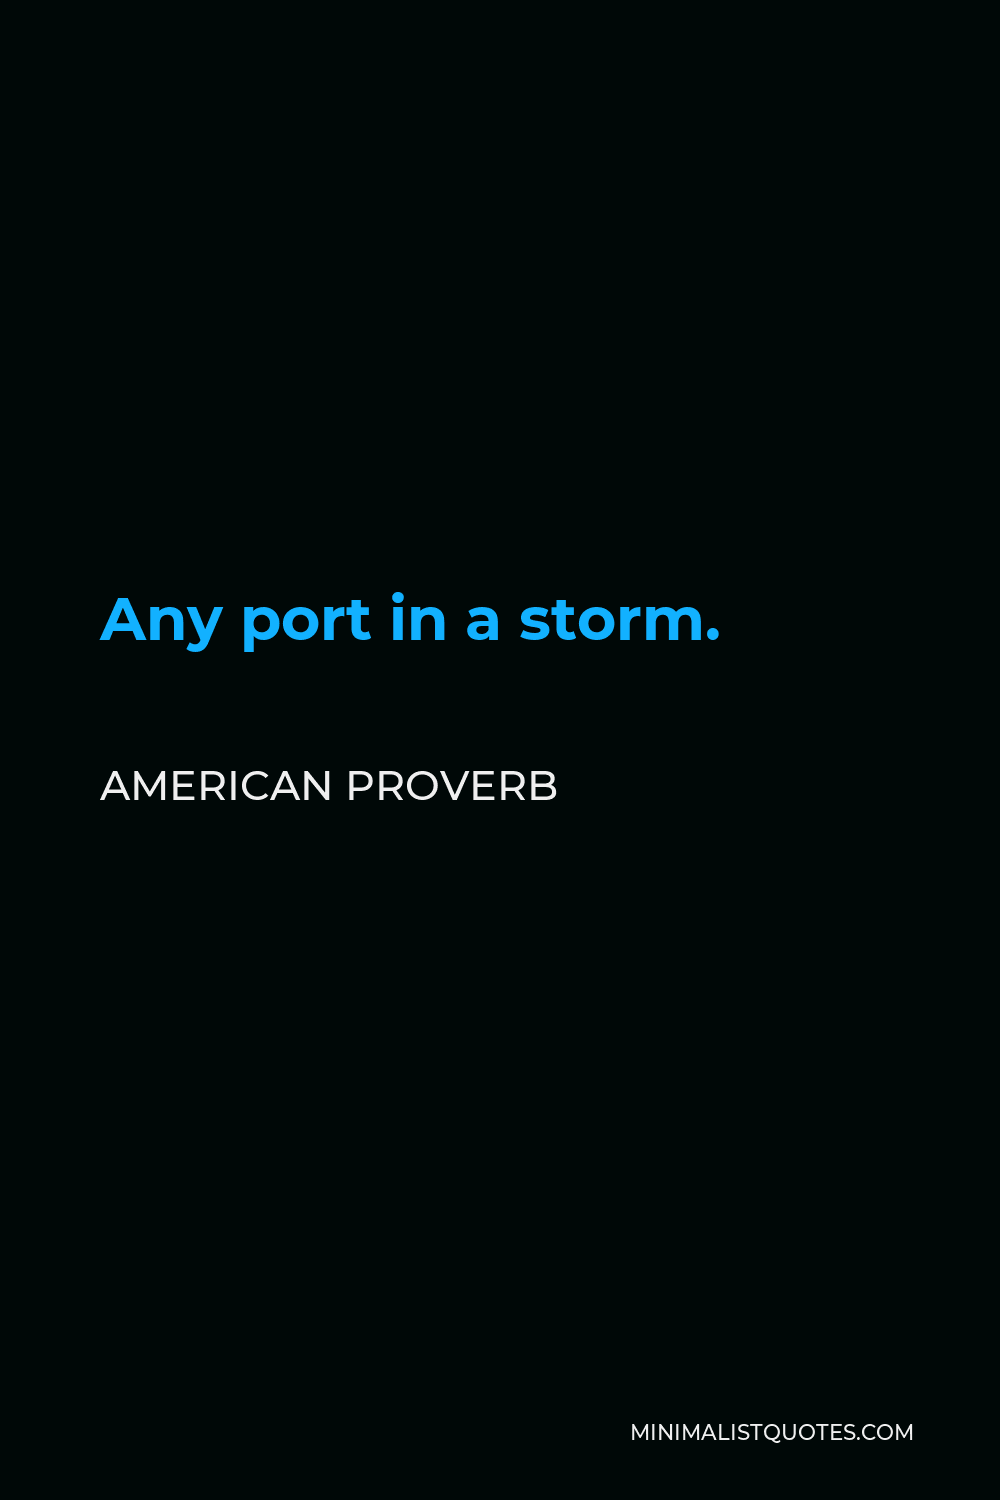 American Proverb Quote - Any port in a storm.